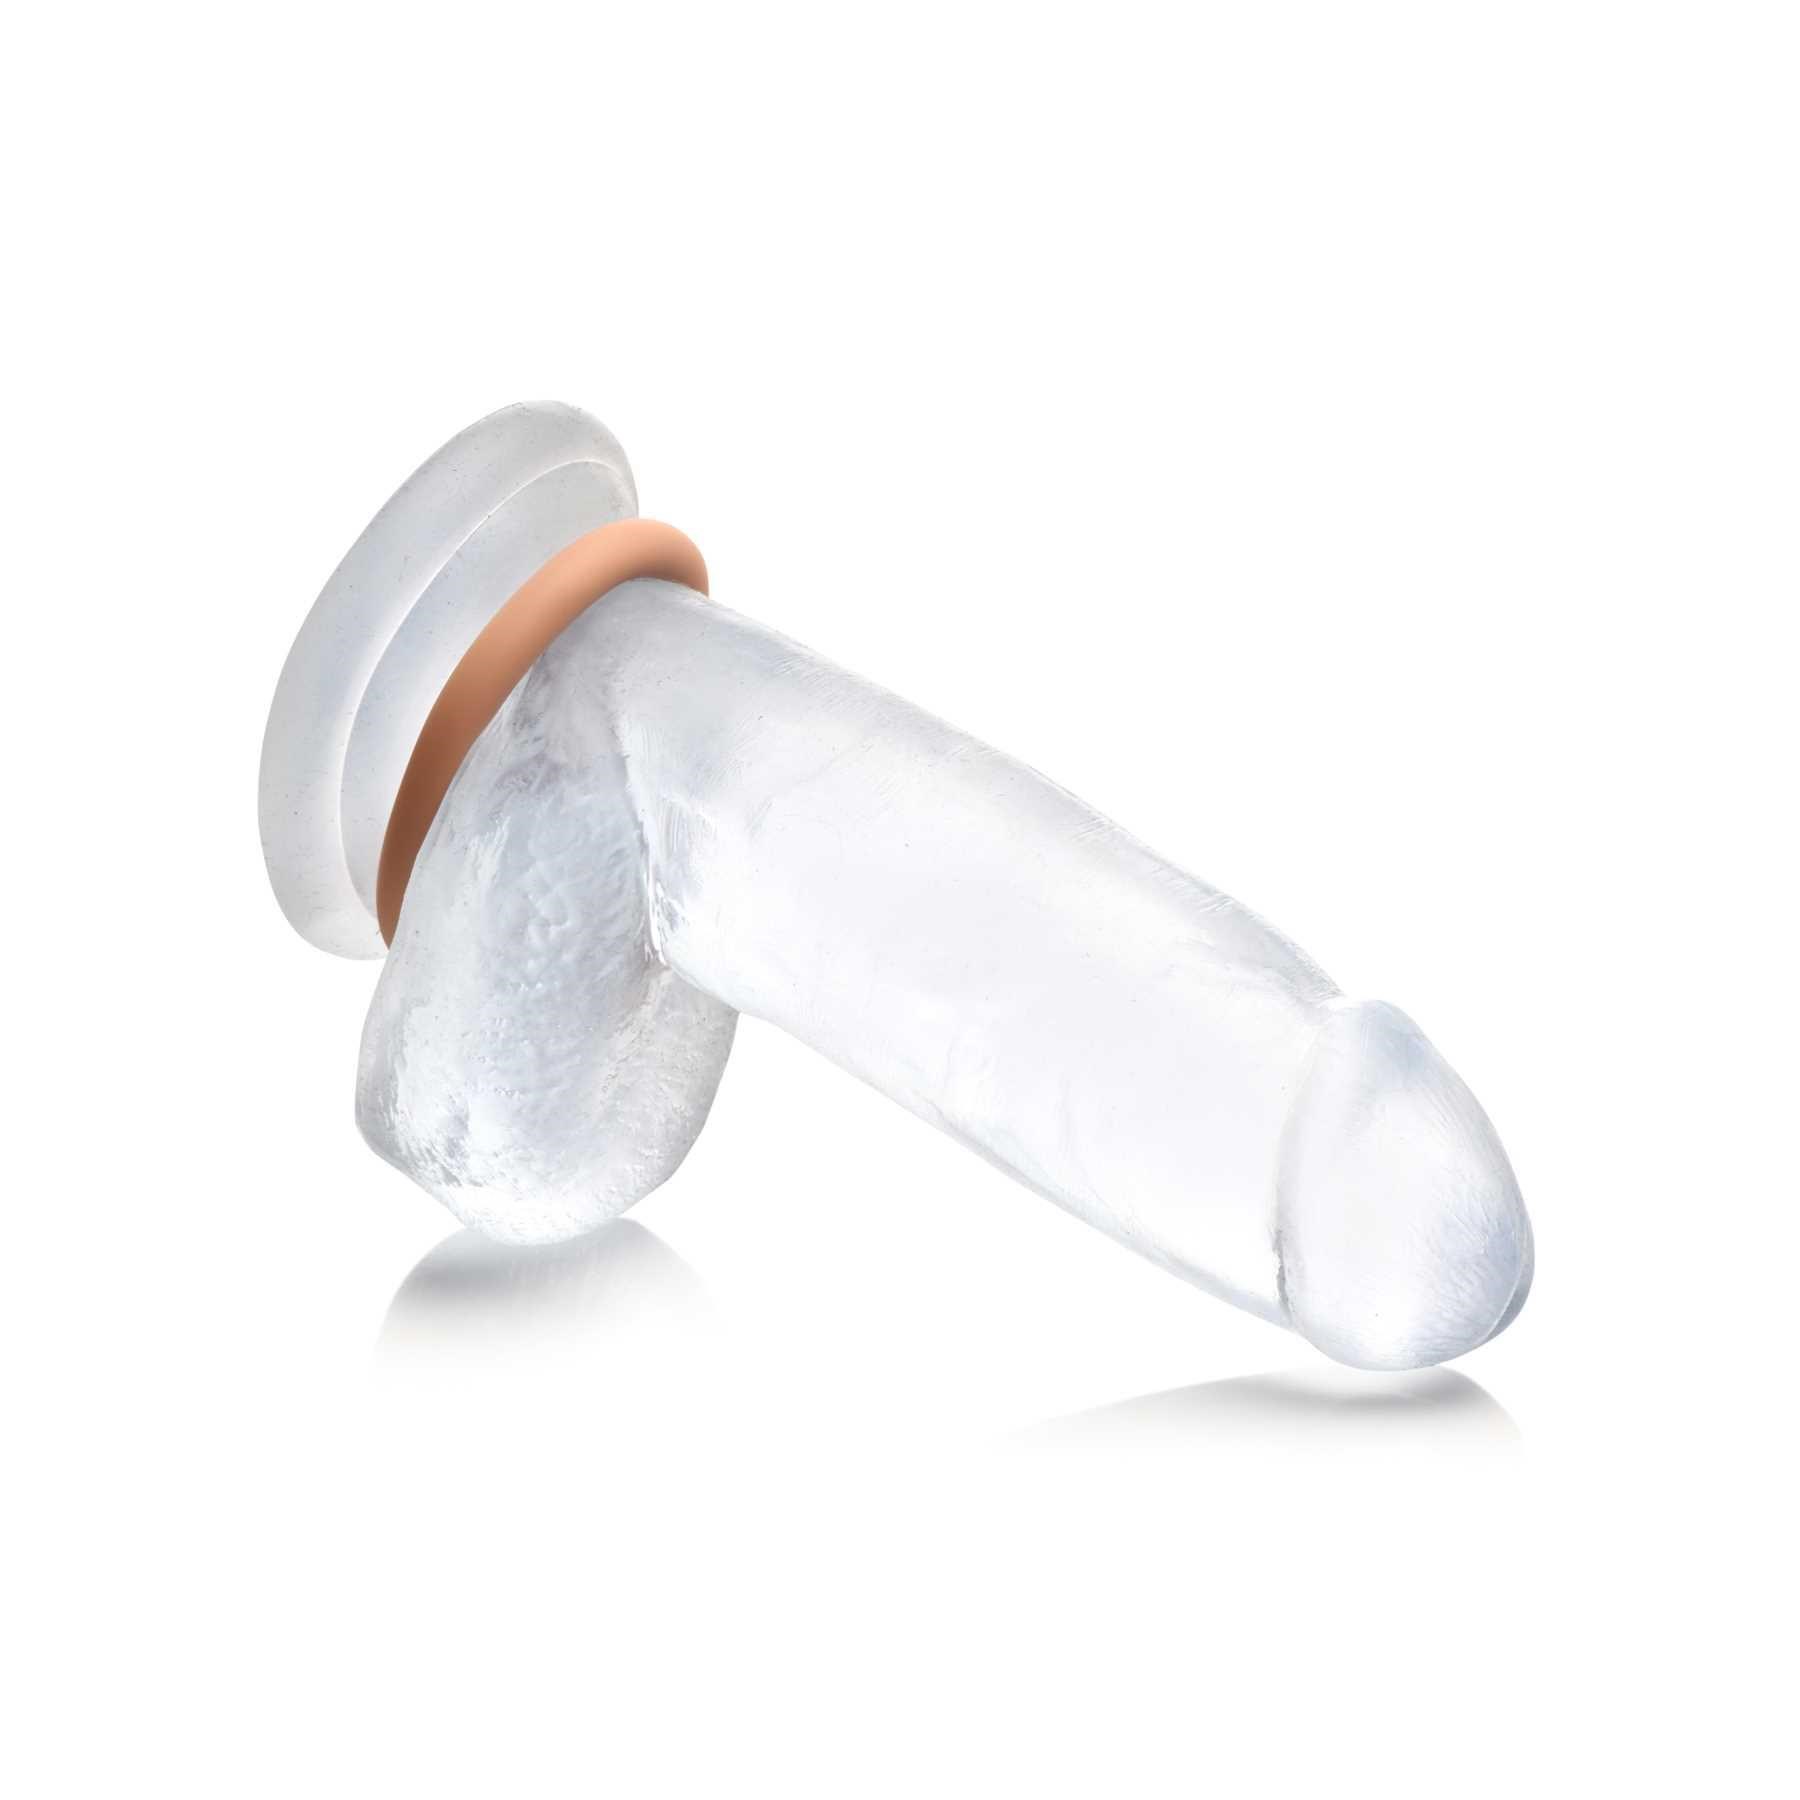 Jock Silicone Cock Ring Set tan with single ring on dildo